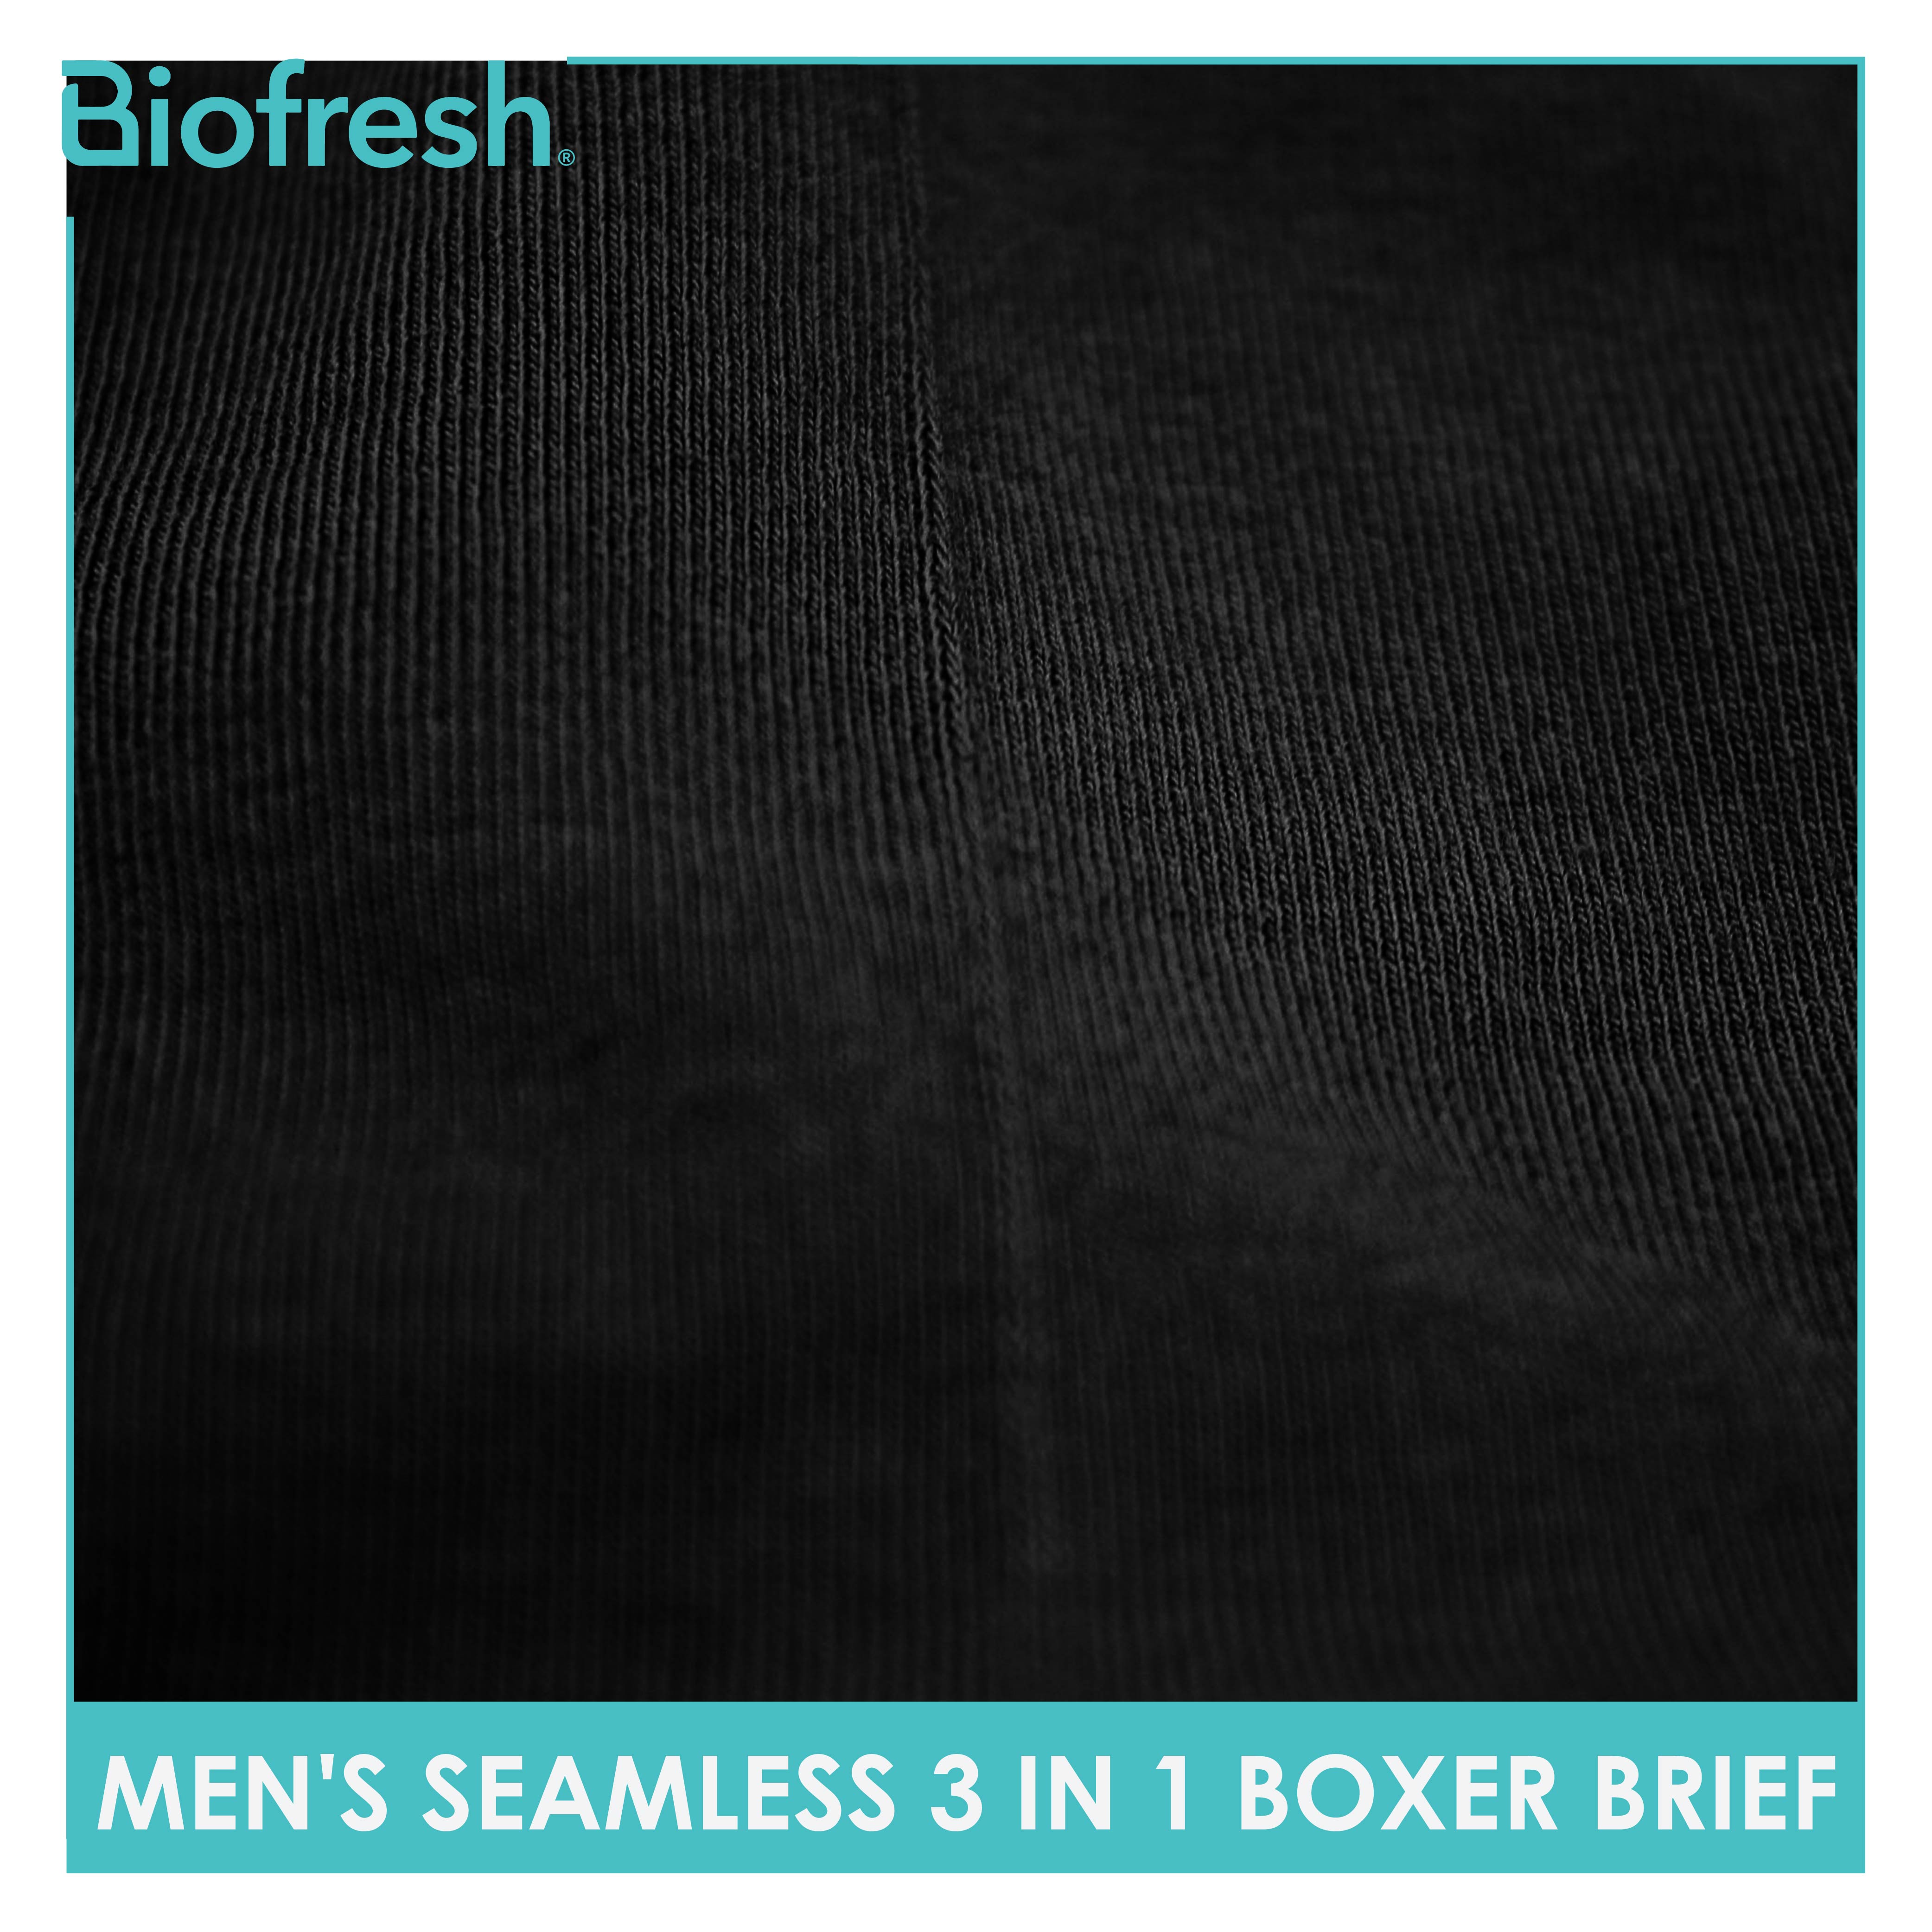 Biofresh PH - Life's too short to wear mediocre underwear. #Biofresh  undergarments has antimicrobial finish that keeps you fresh and odor free  all day! #KeepEmFresh